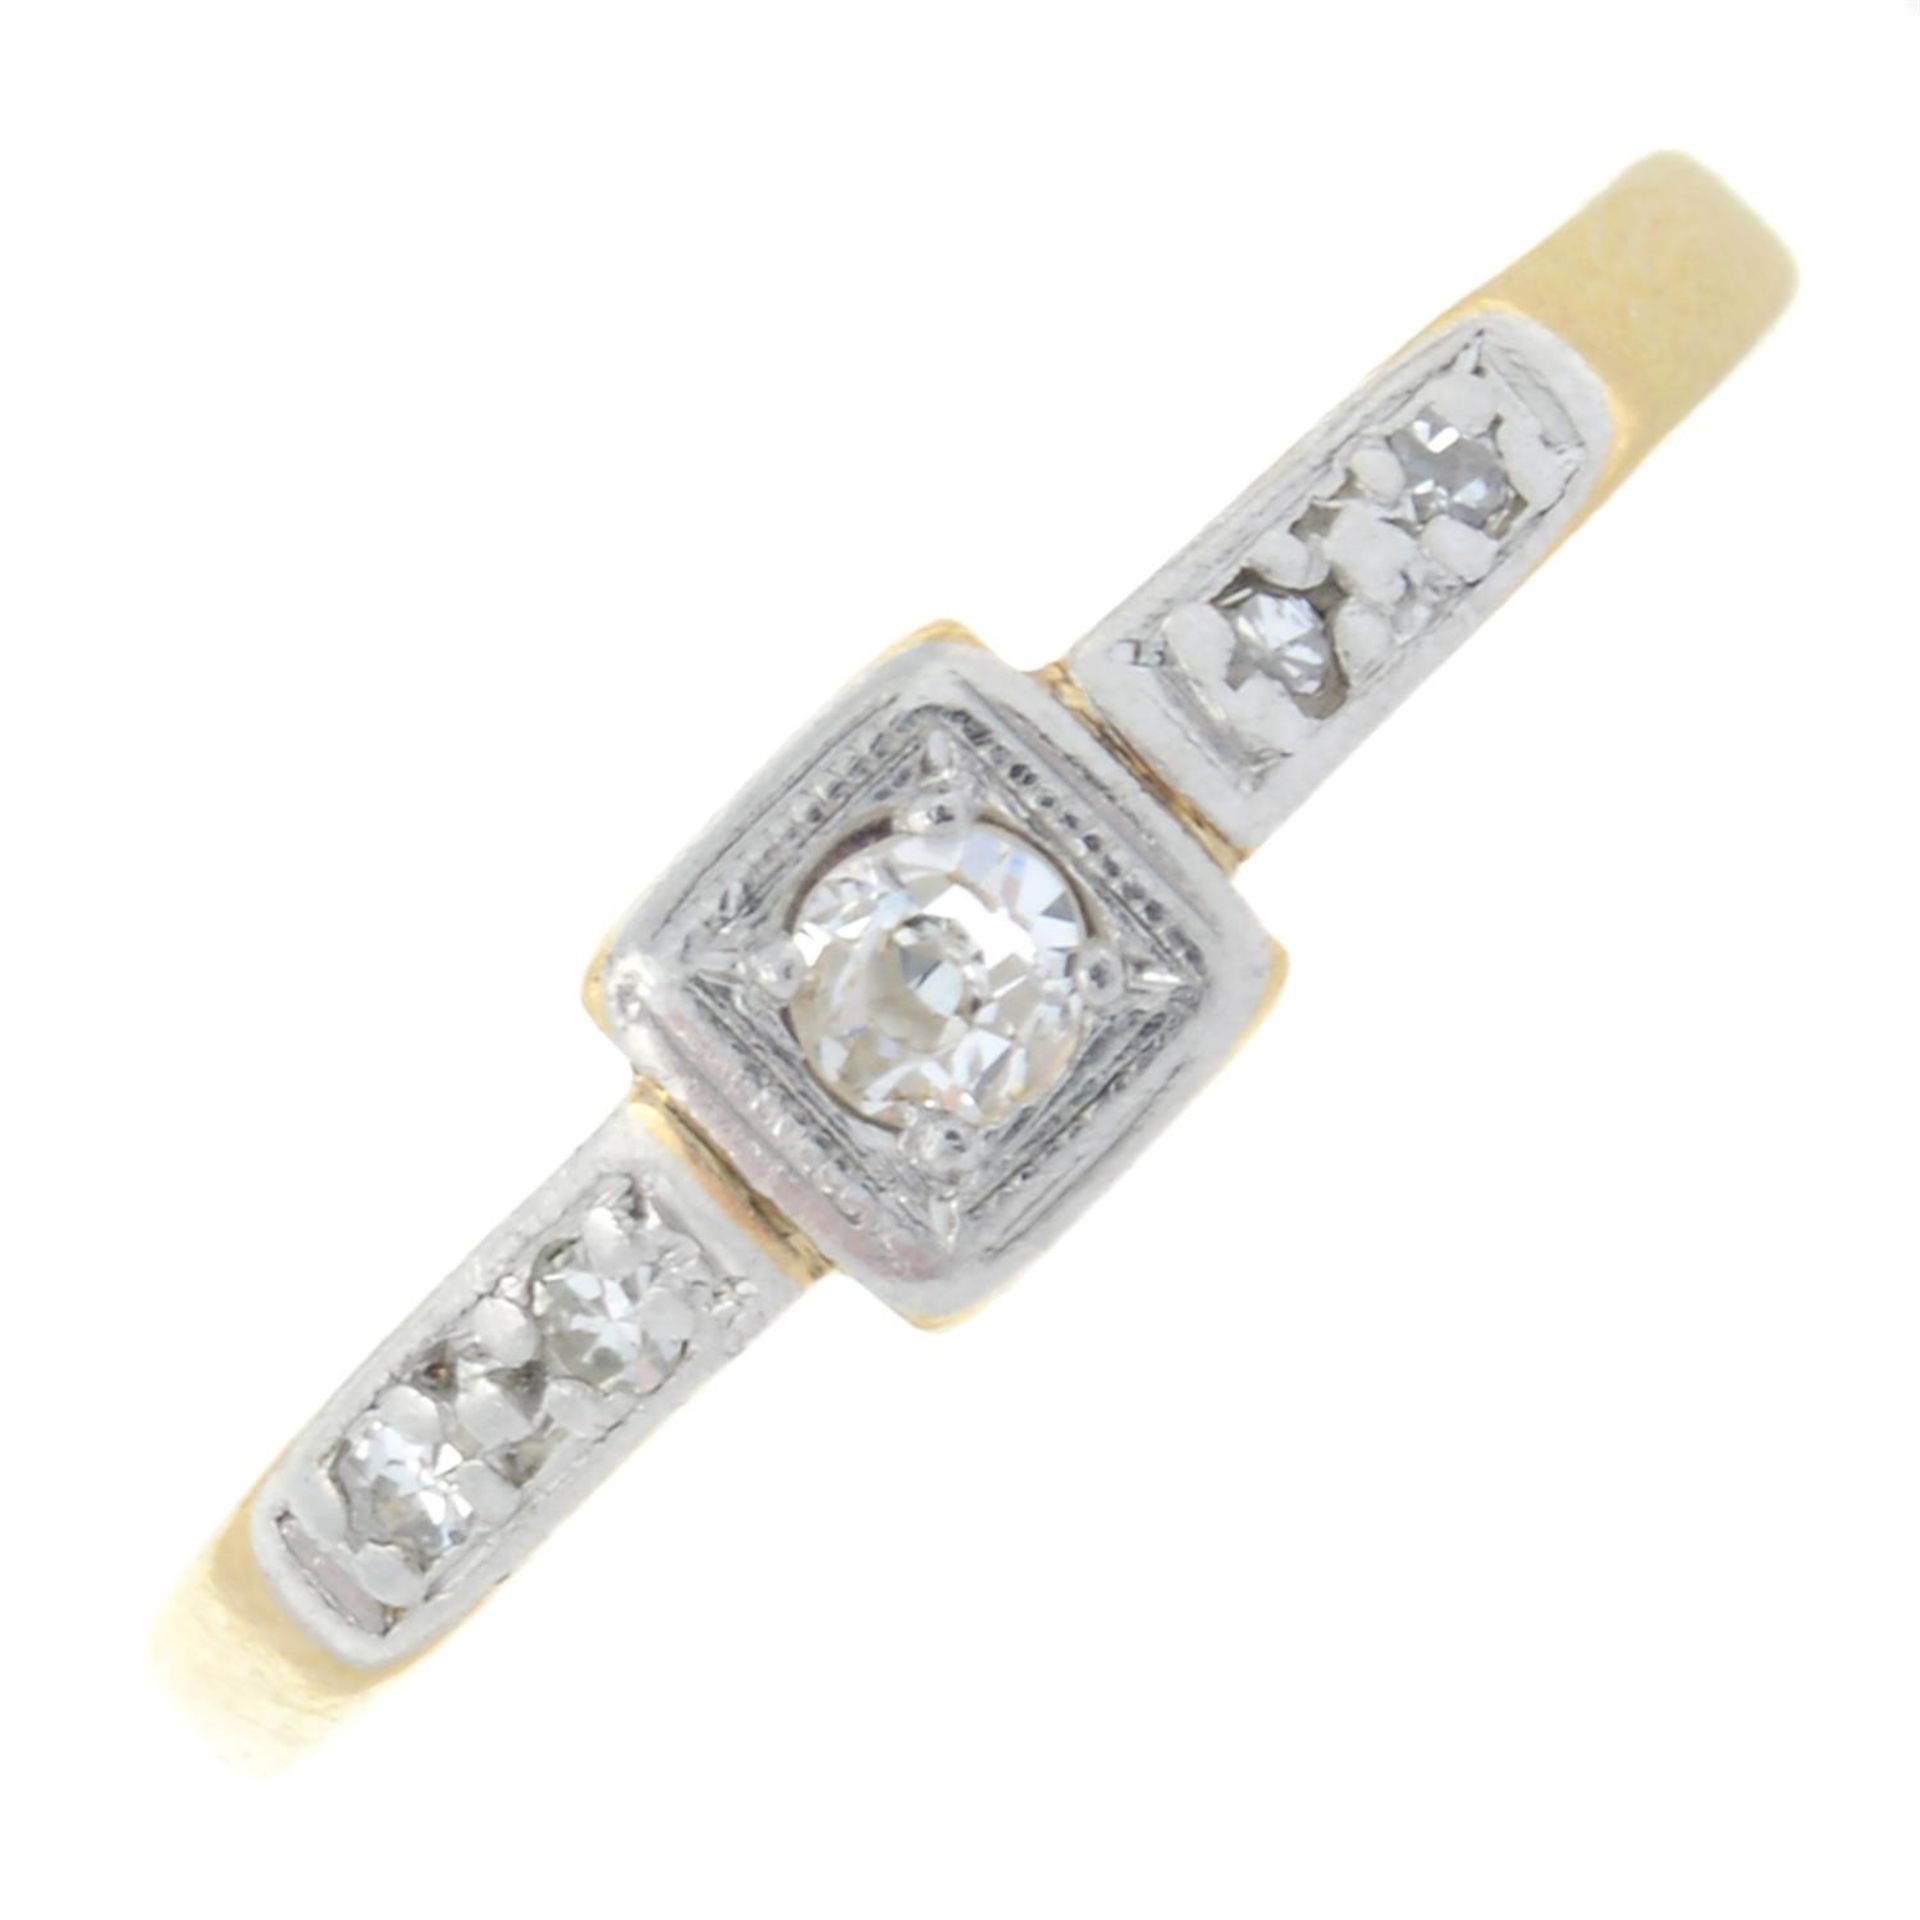 An early 20th century 18ct gold and platinum diamond ring.